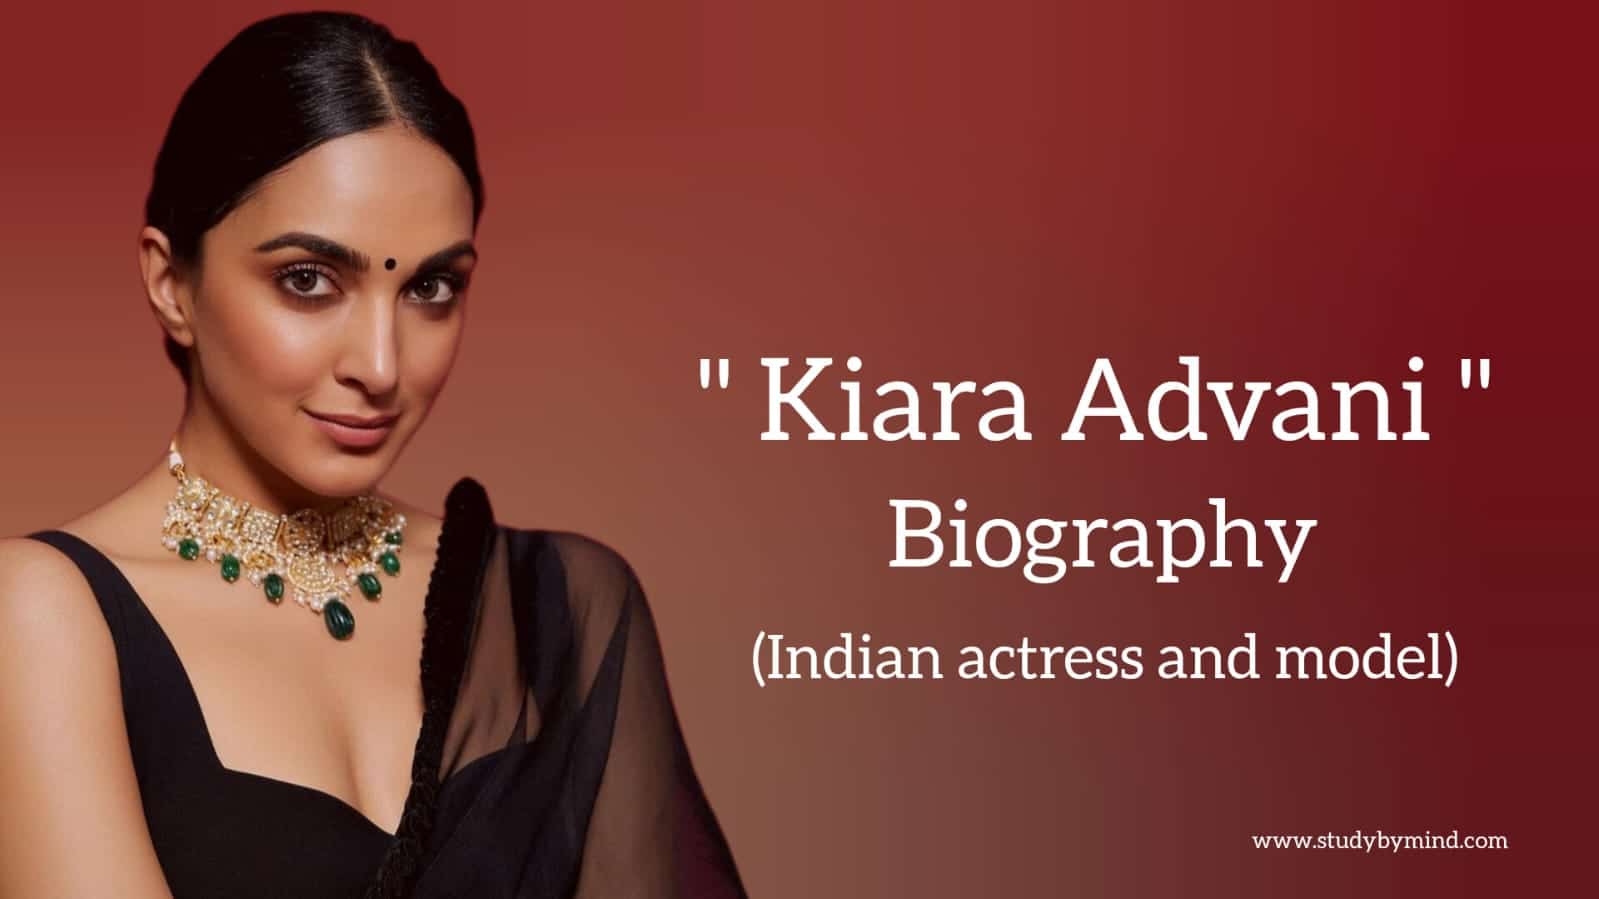 You are currently viewing Kiara advani biography in english (Indian actress)